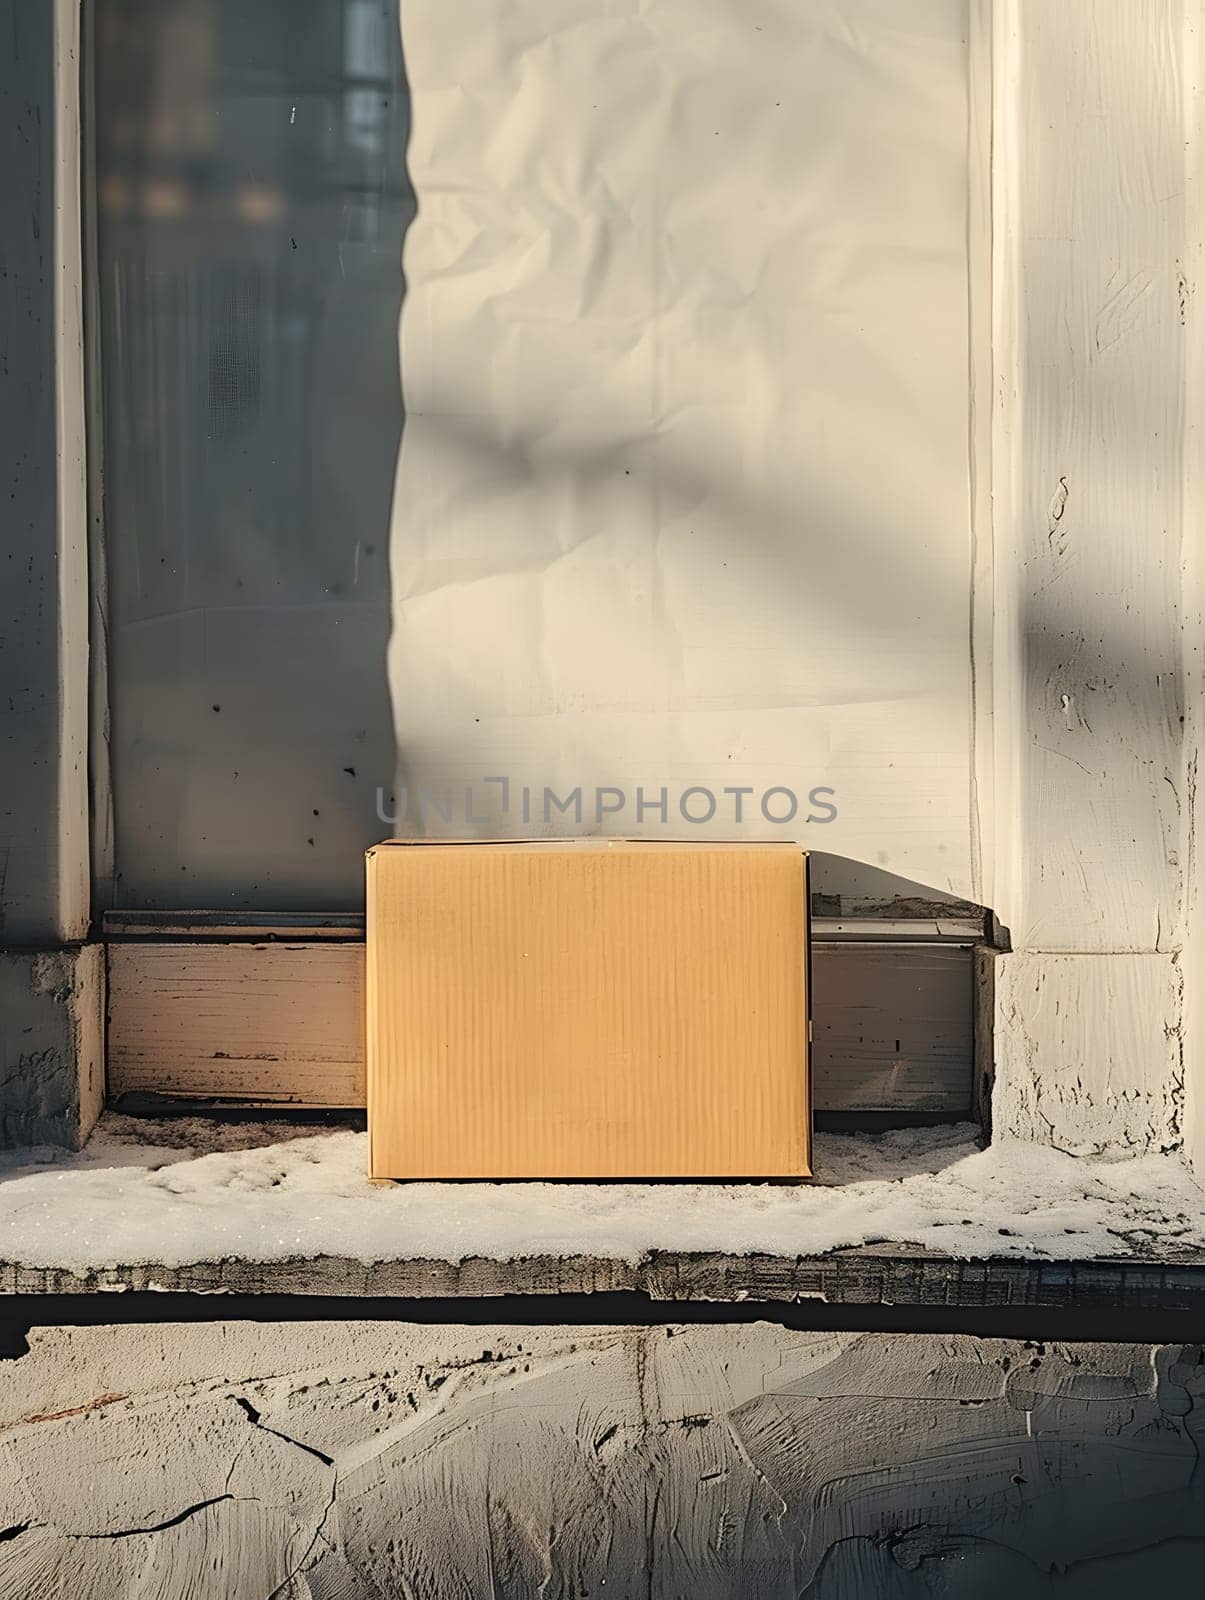 A yellow rectangular box sits on a stone ledge next to a hardwood door. The contrast of colors between the box and the flooring creates a vibrant scene against the asphalt road surface